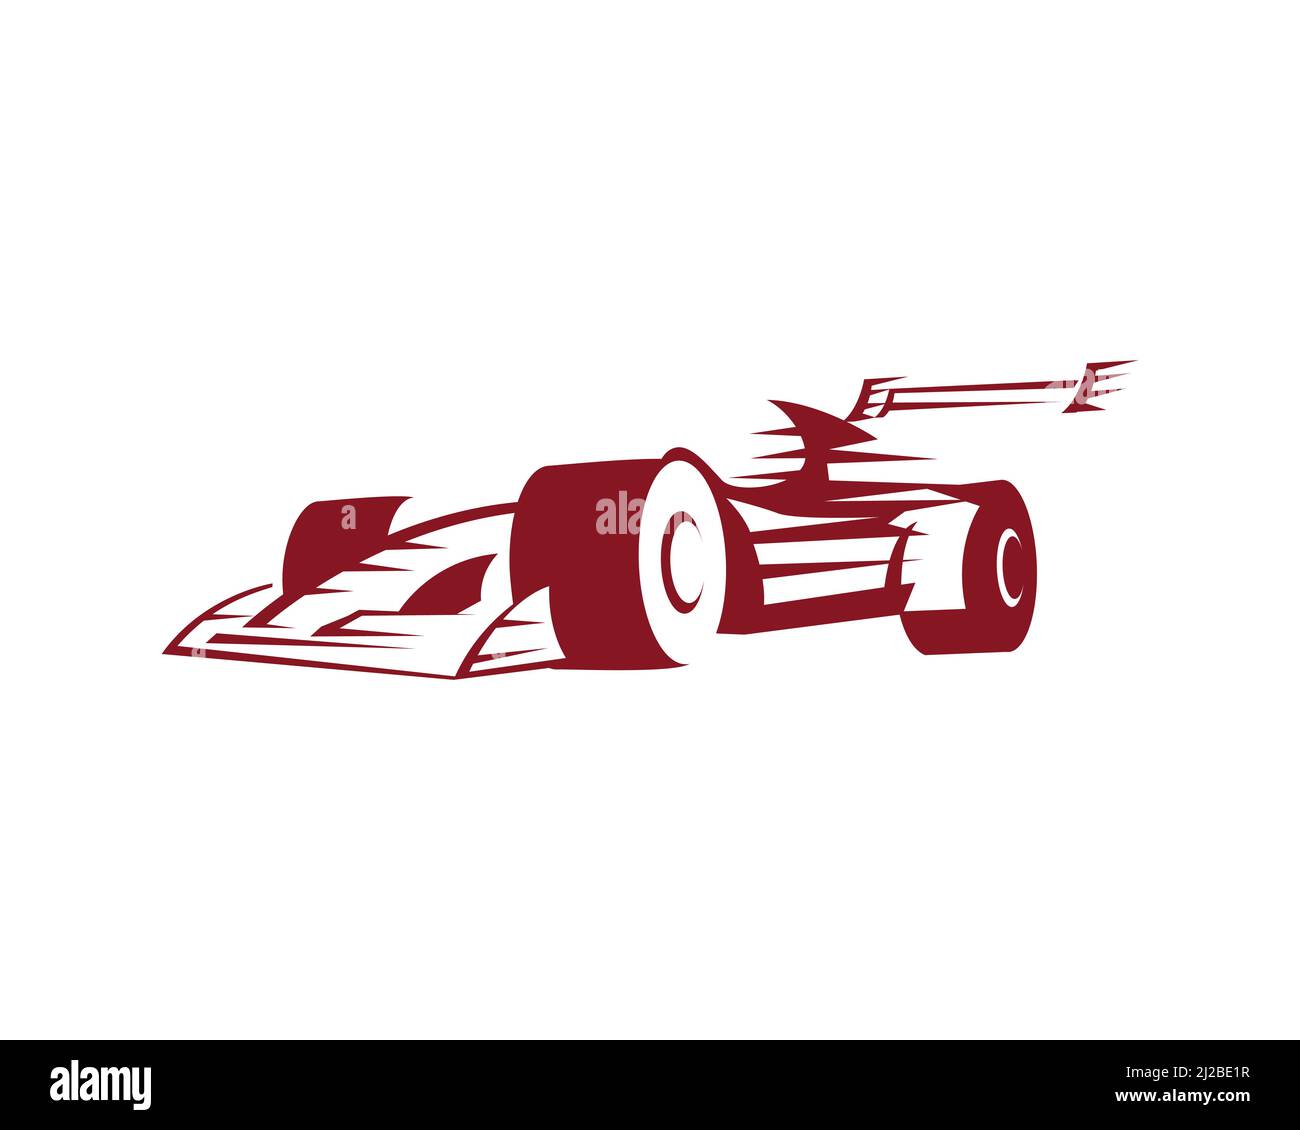 Formula Racing Car Illustration with Silhouette Style Stock Vector